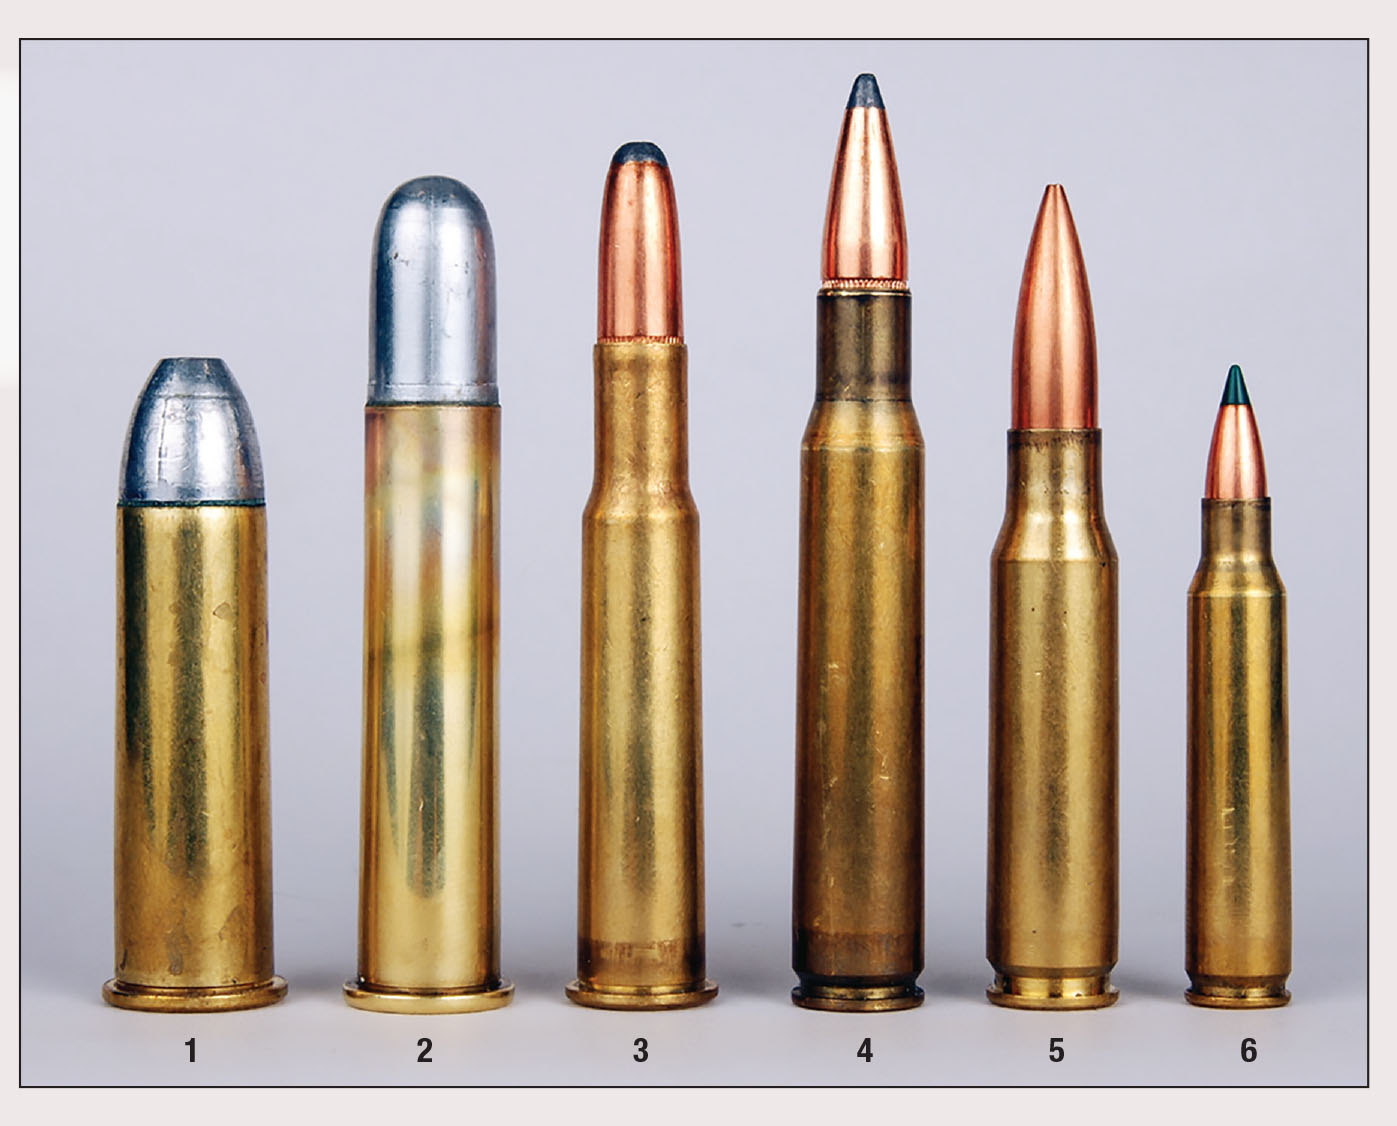 These are Mike’s handloads for the six U.S. military cartridges covered here: (1) 50 Gov’t (50-70), (2) 45 Gov’t (45-70), (3) 30 Army (30-40 Krag), (4) 30 U.S. M1906 (30-06), (5) 7.62mm NATO (308 Winchester) and (6) 5.56mm (223 Remington).